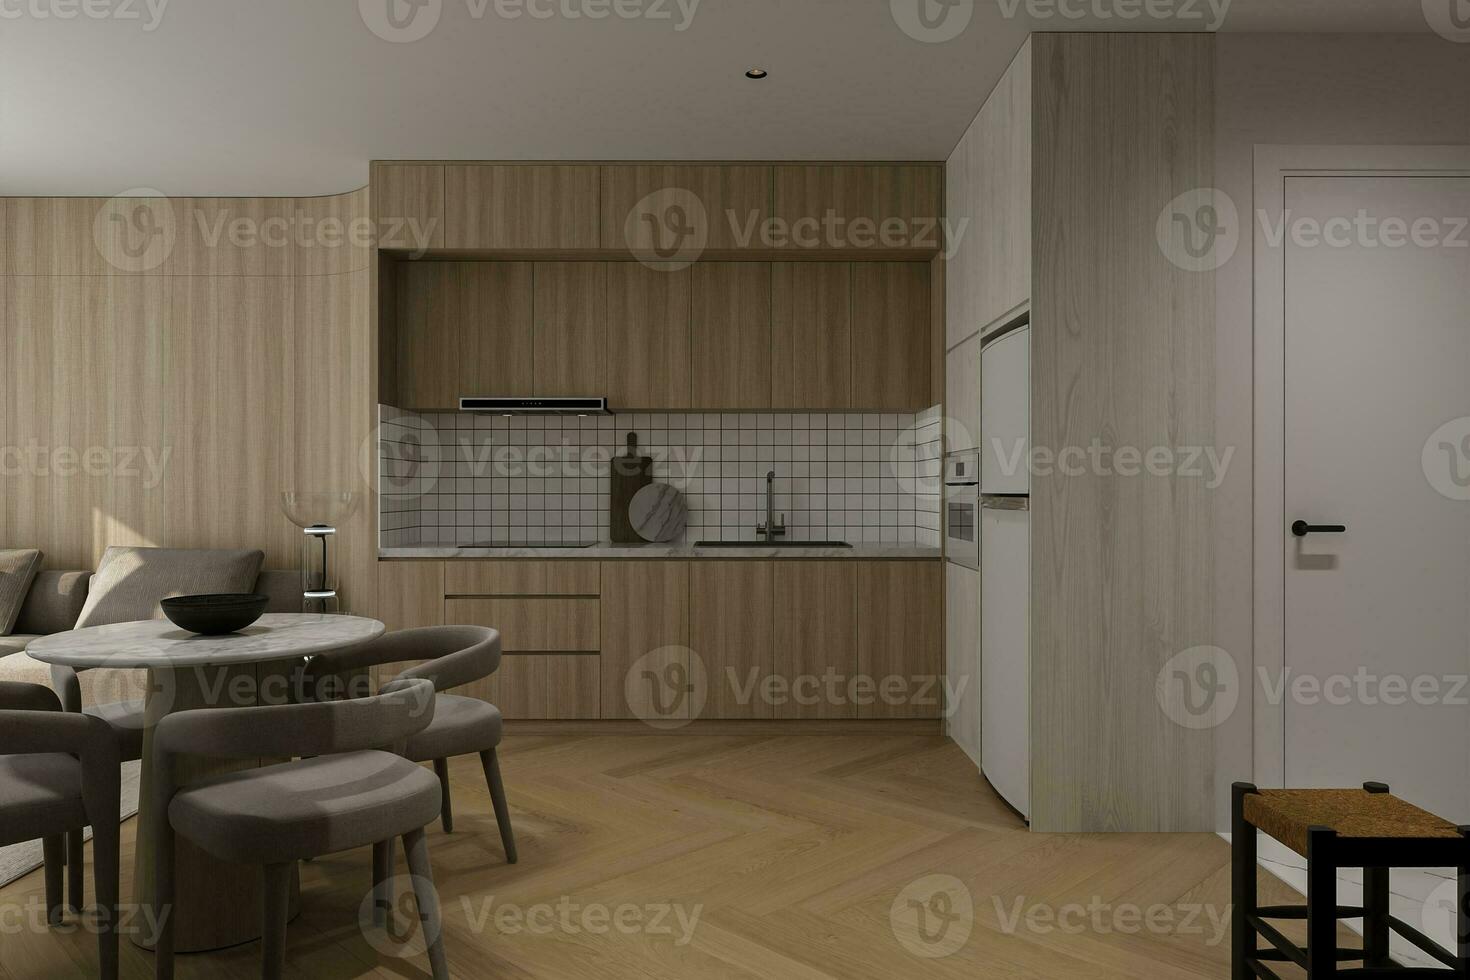 White and wooden decoration For walls and Floor, Efrotable Stuff in the studio house, 3D rendering photo